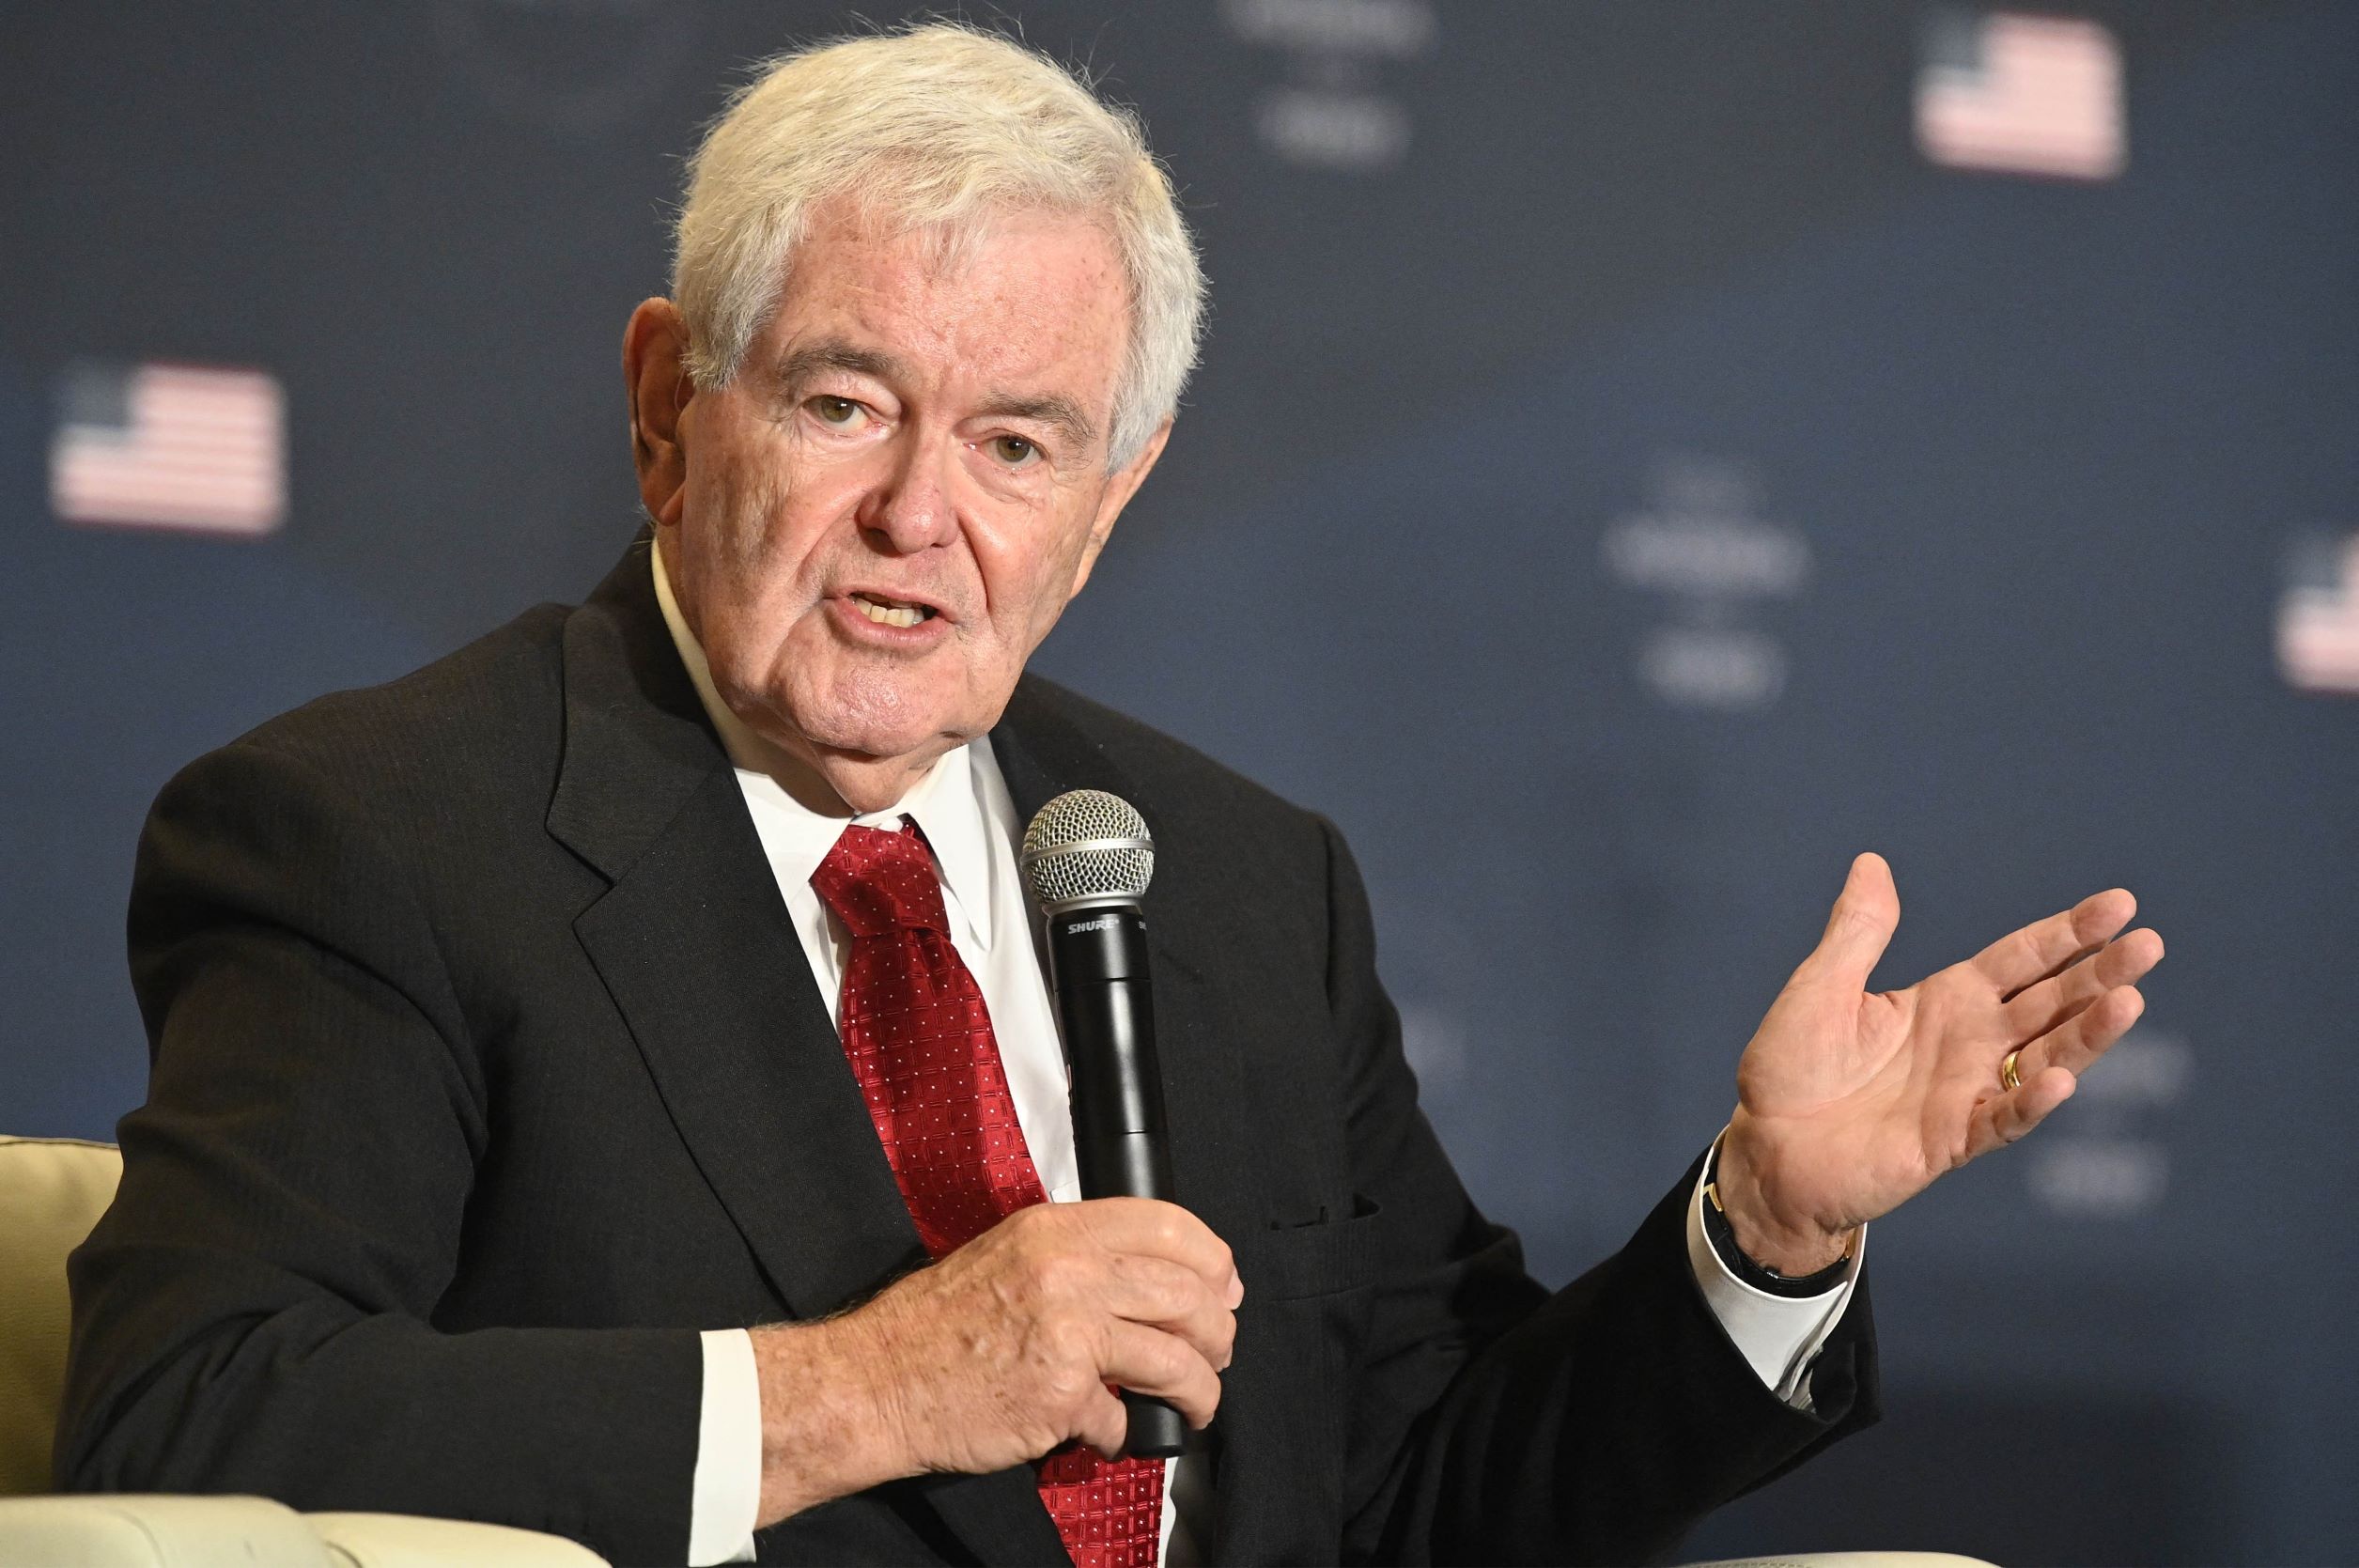 Jan. 6 Panel Seeks Interview With Newt Gingrich Over Alleged Efforts in Election Fraud Claims